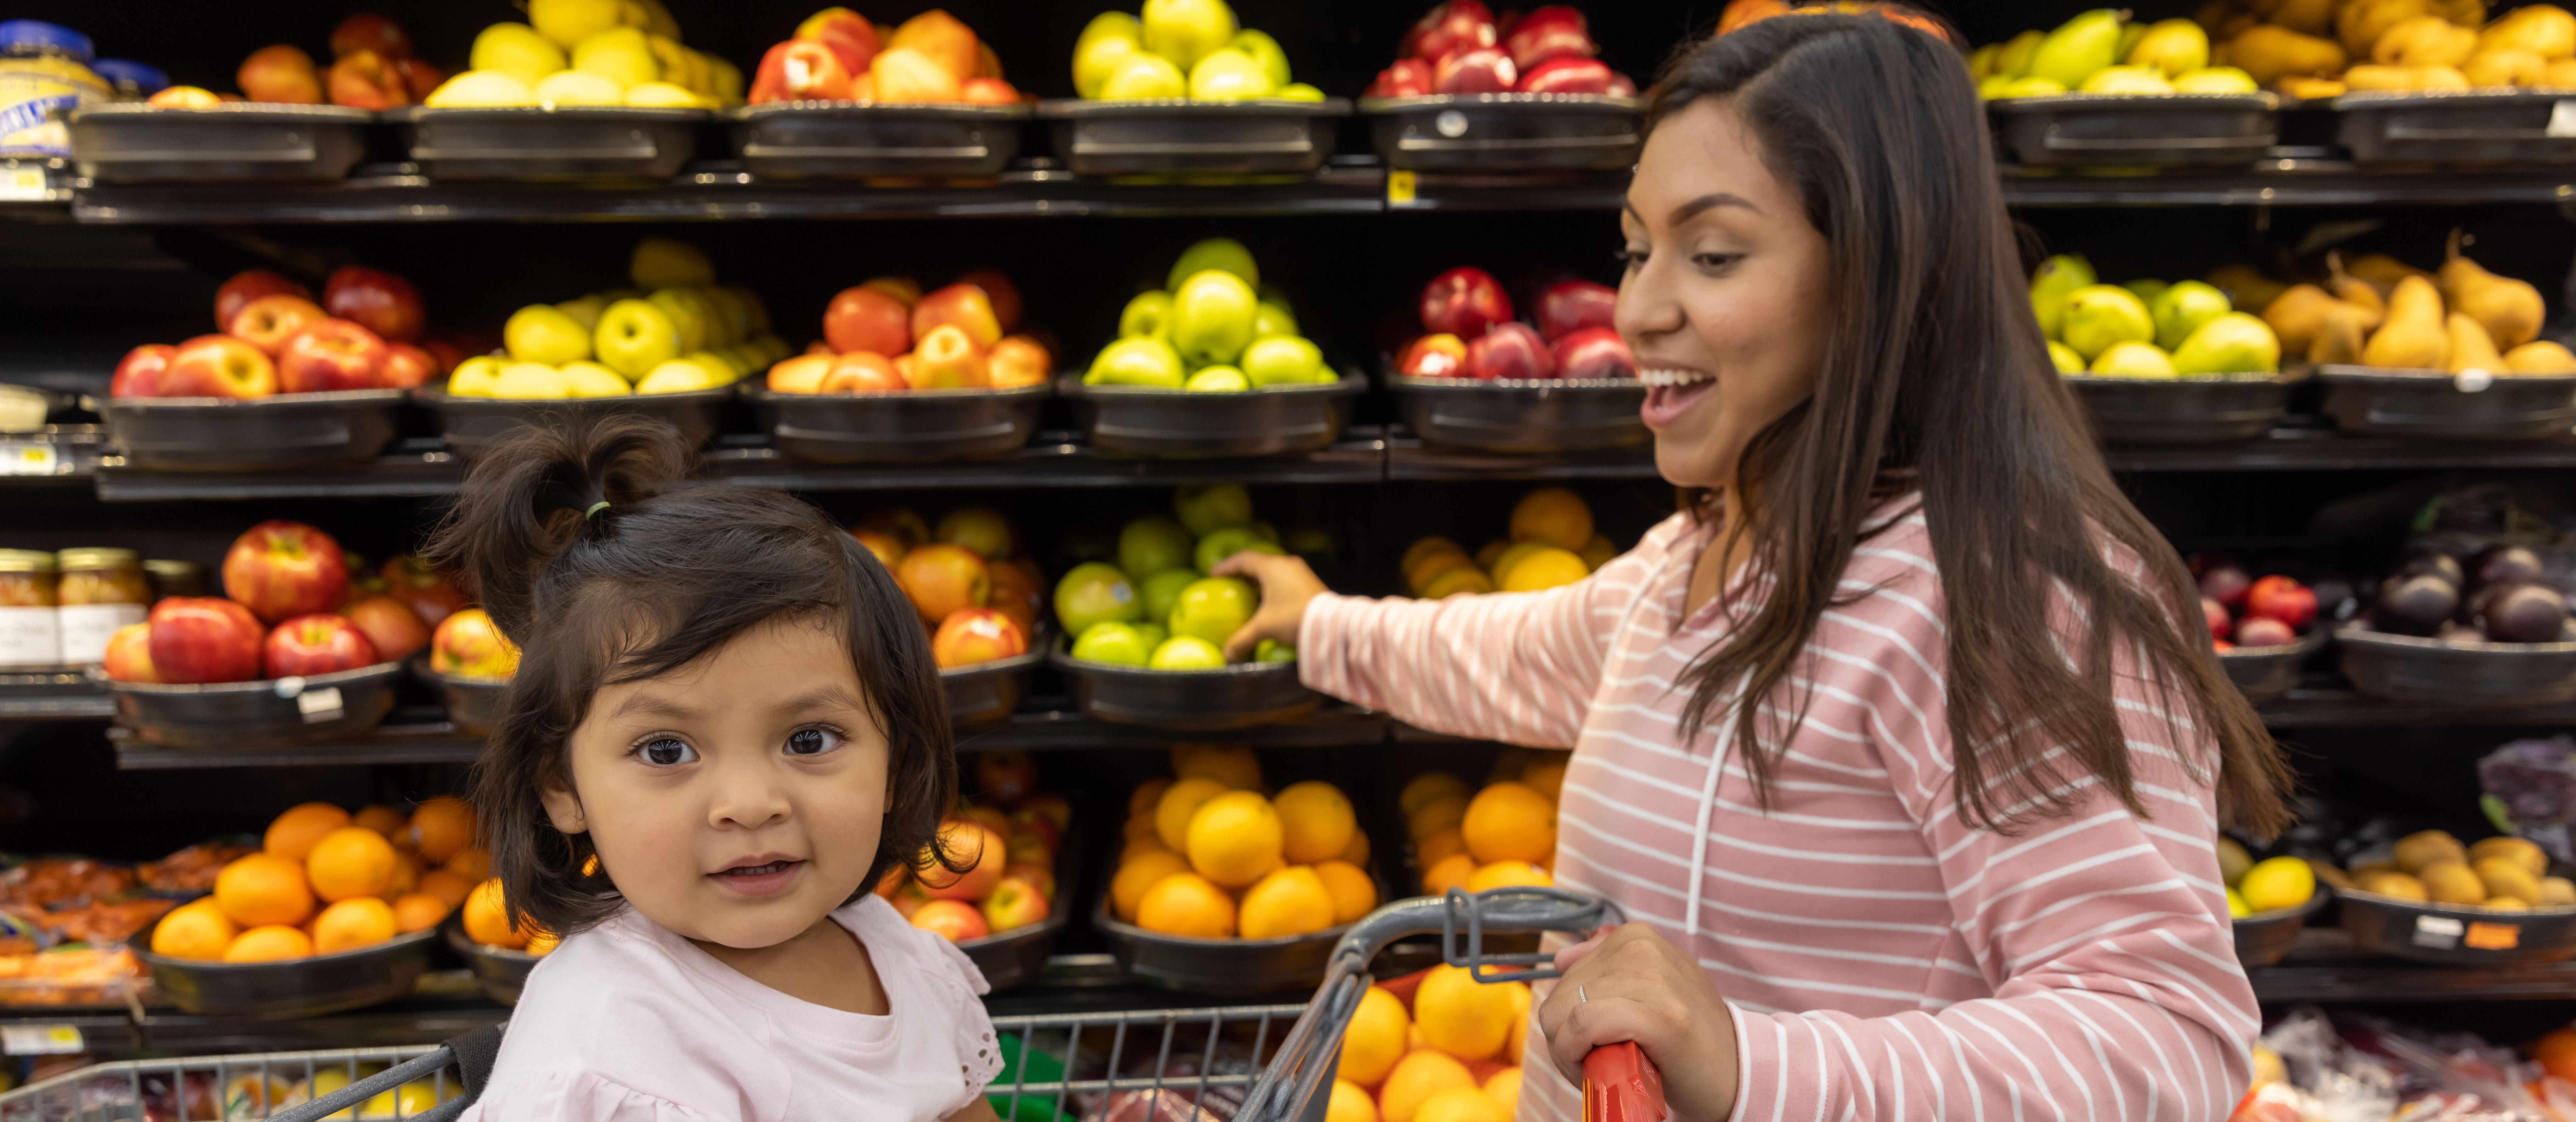 A woman and young girl shop for fruit in a grocery store.